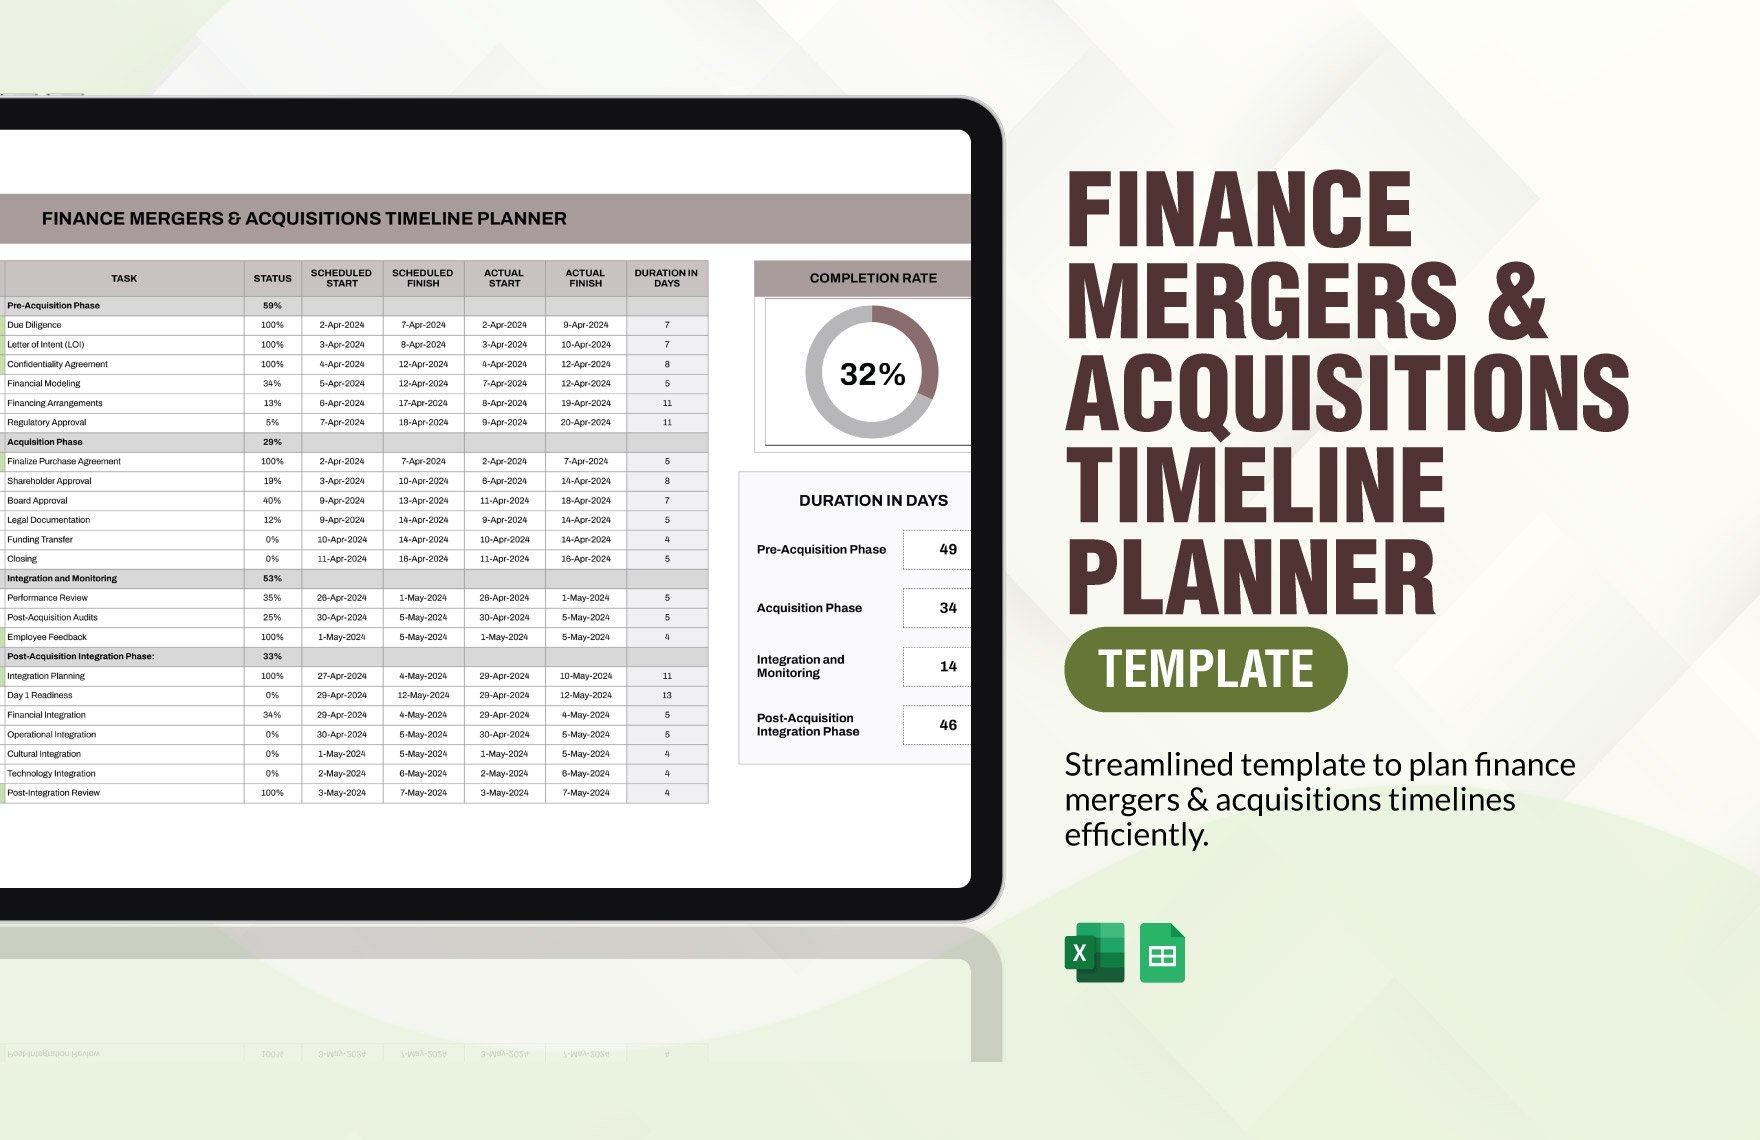 Finance Mergers & Acquisitions Timeline Planner Template in Excel, Google Sheets